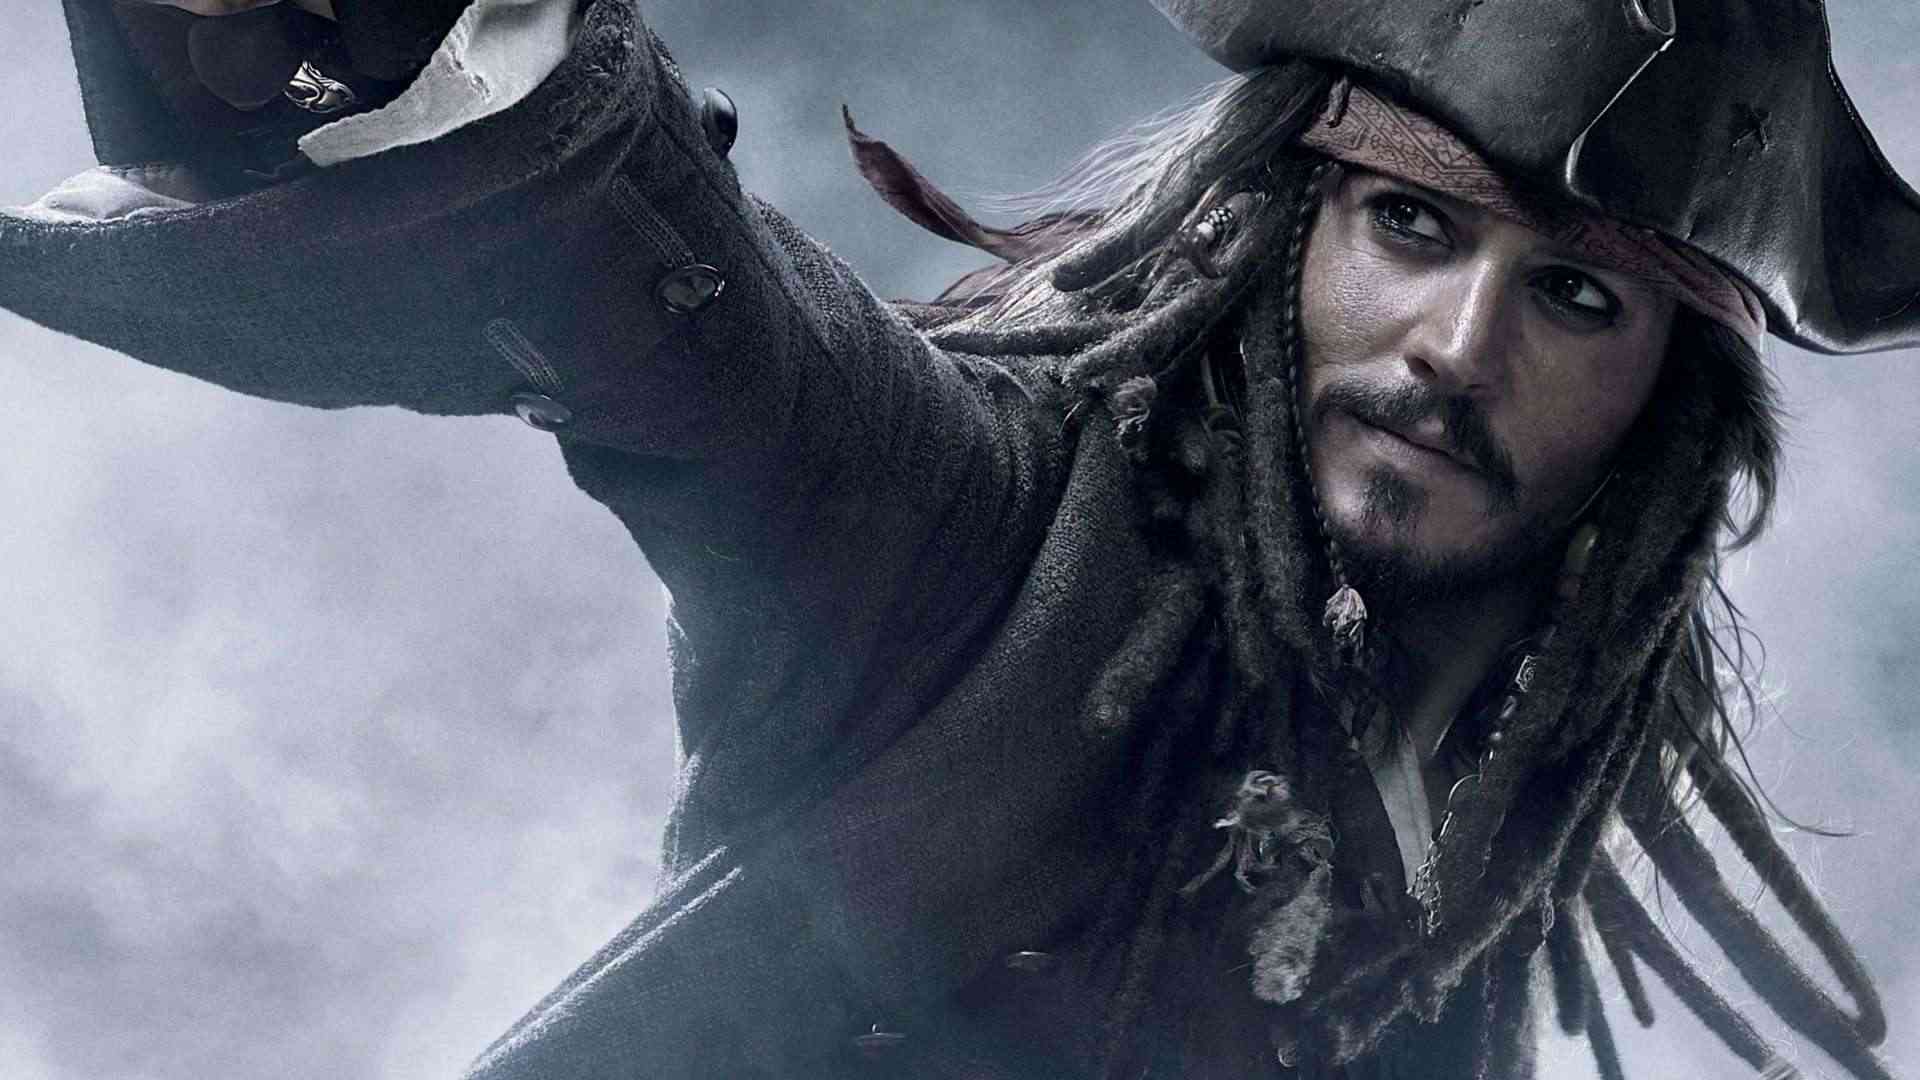 Johnny Depp returns to the Pirates of the Caribbean franchise